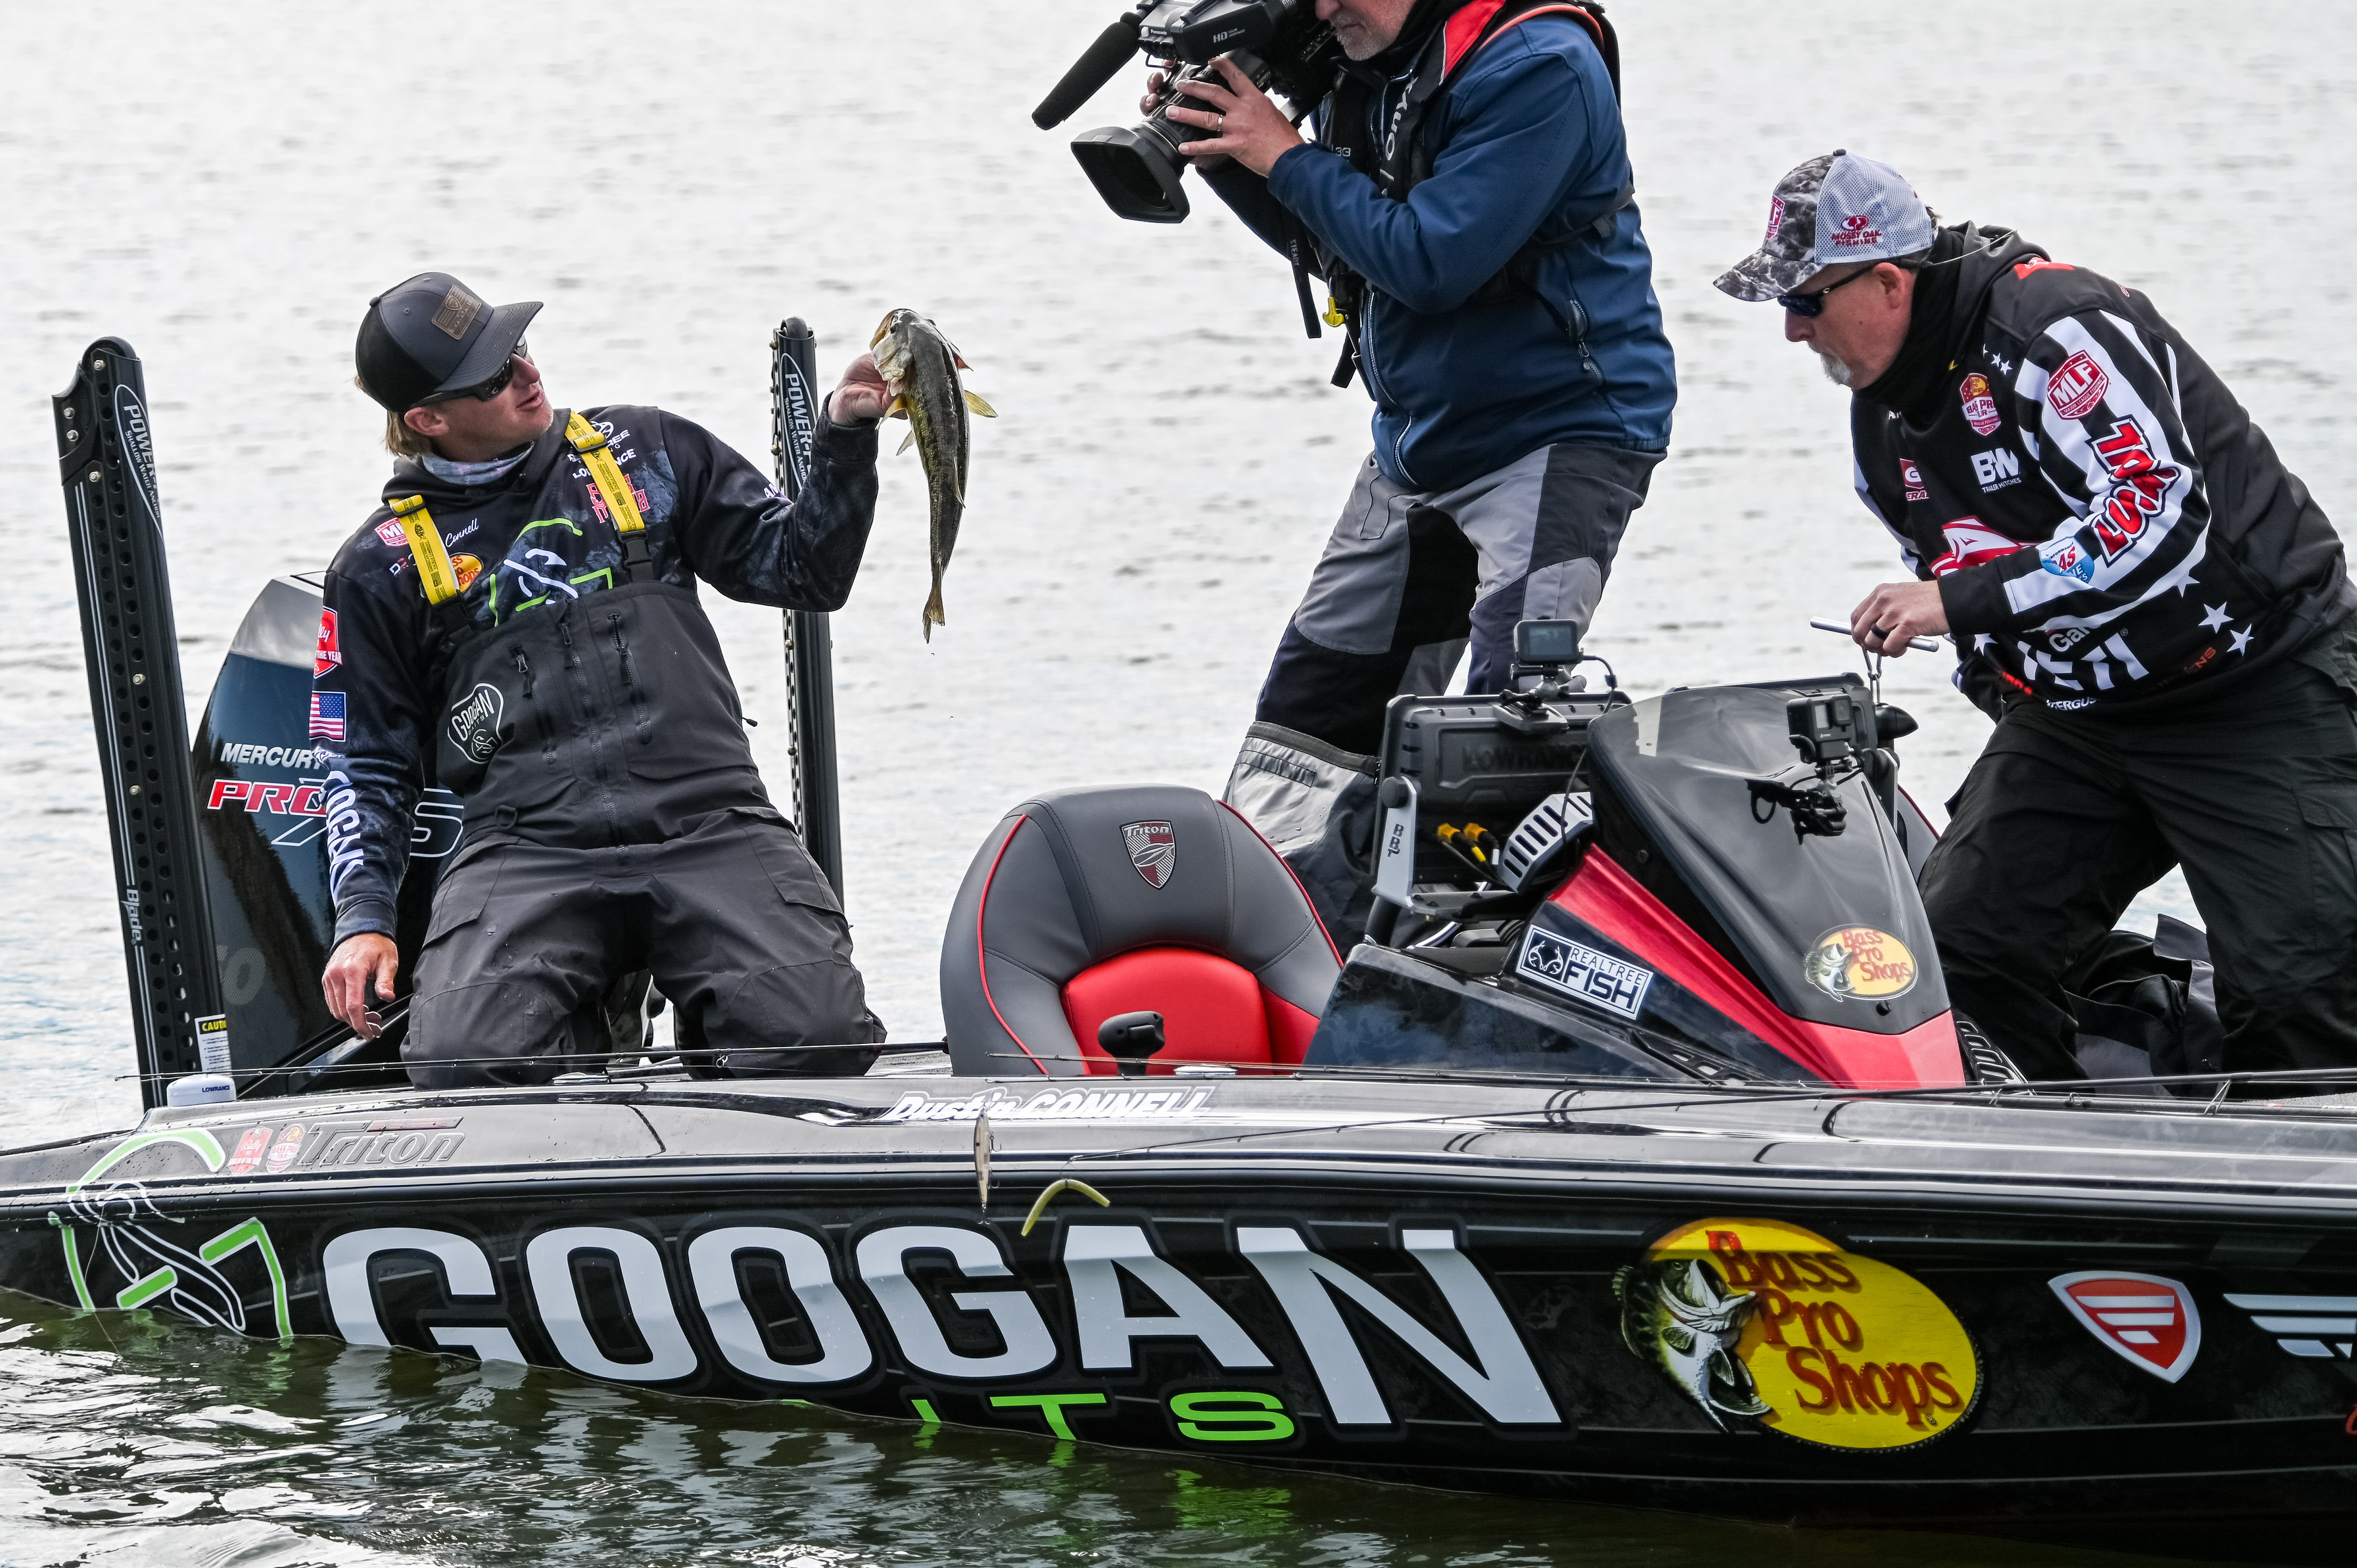 Dustin Connell leads Day 1 of Bass Pro Shops REDCREST Presented by